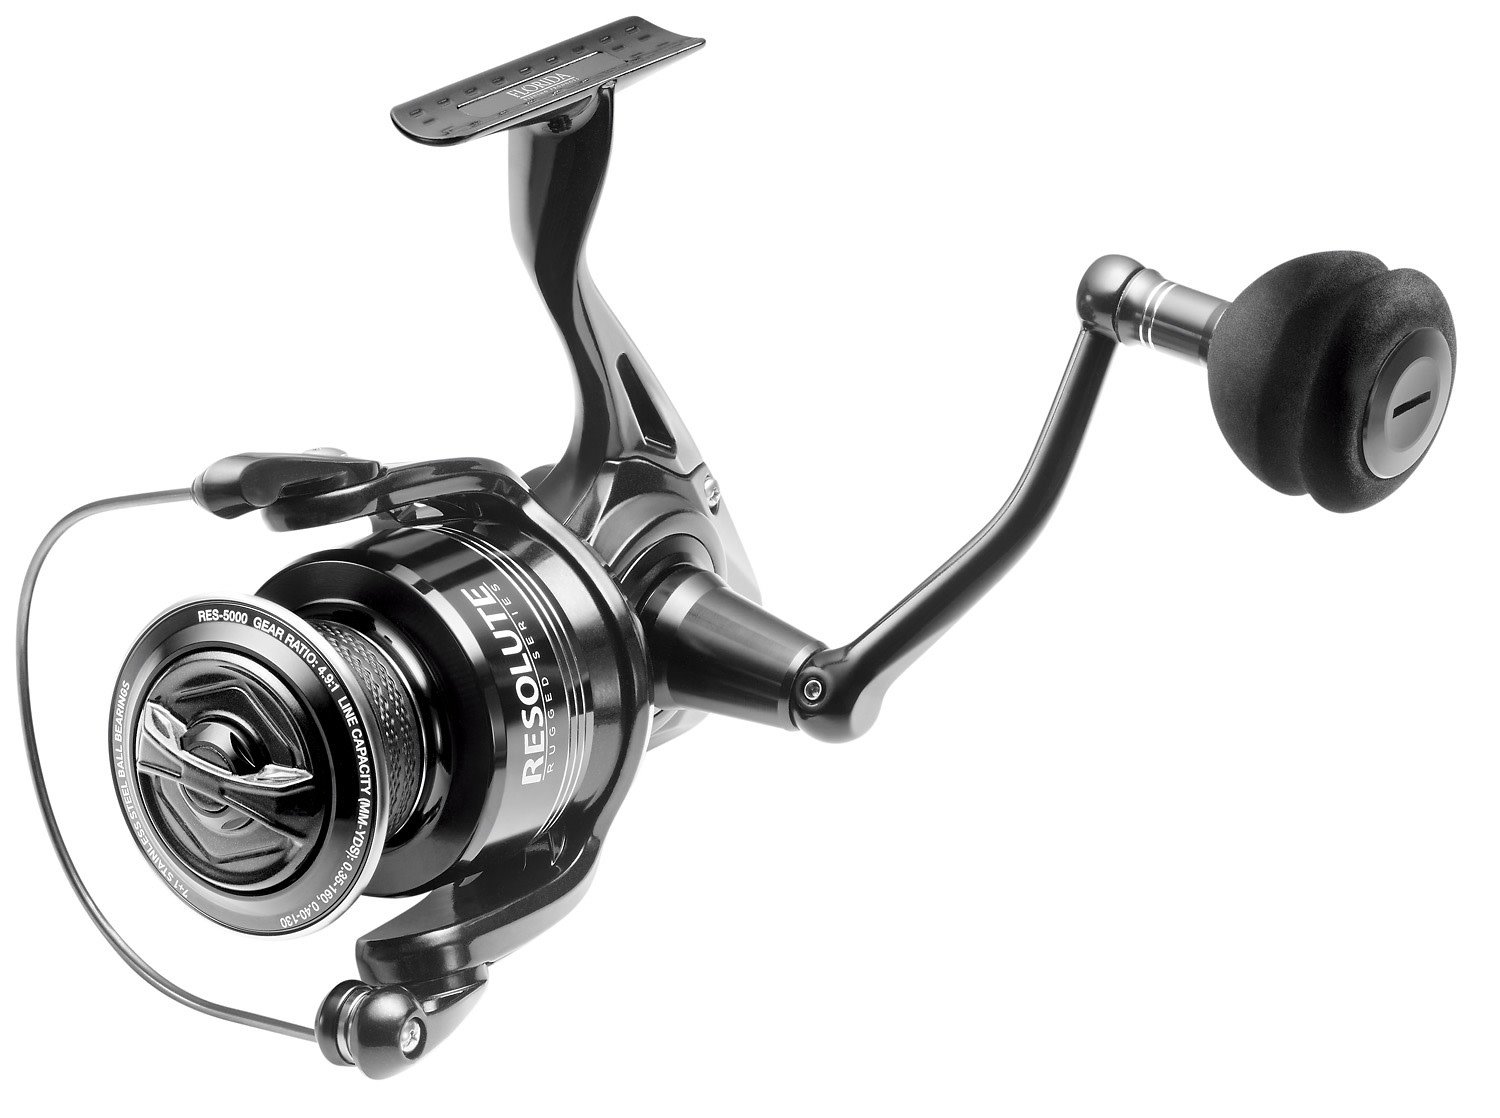 Florida Fishing Products Resolute Rugged Saltwater Spinning Reel 8000